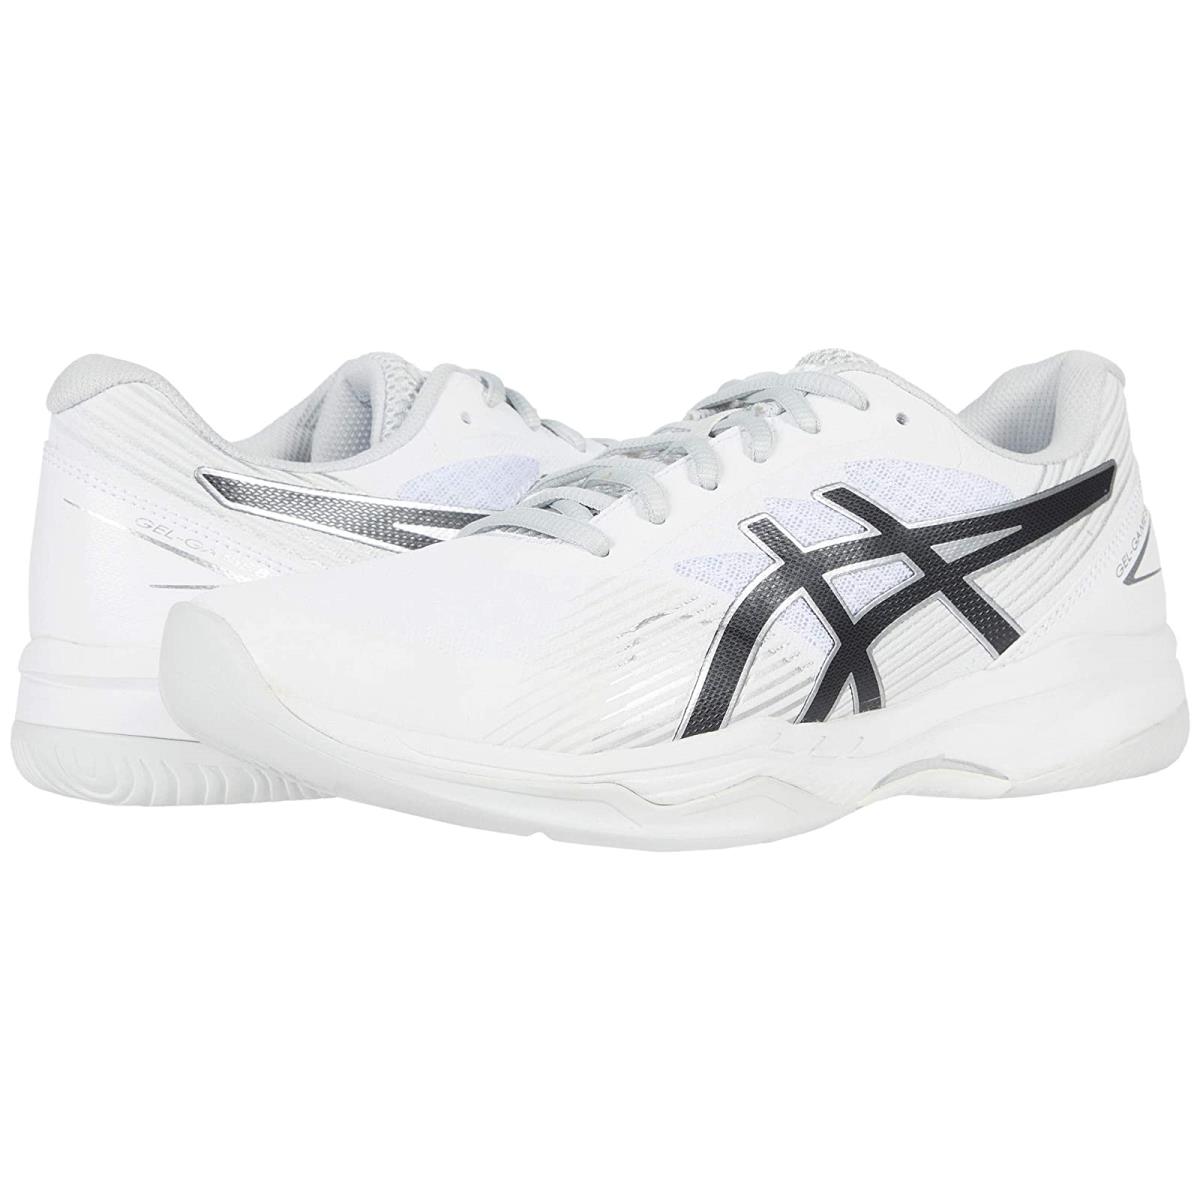 Man`s Sneakers Athletic Shoes Asics Gel-game 8 White/Black